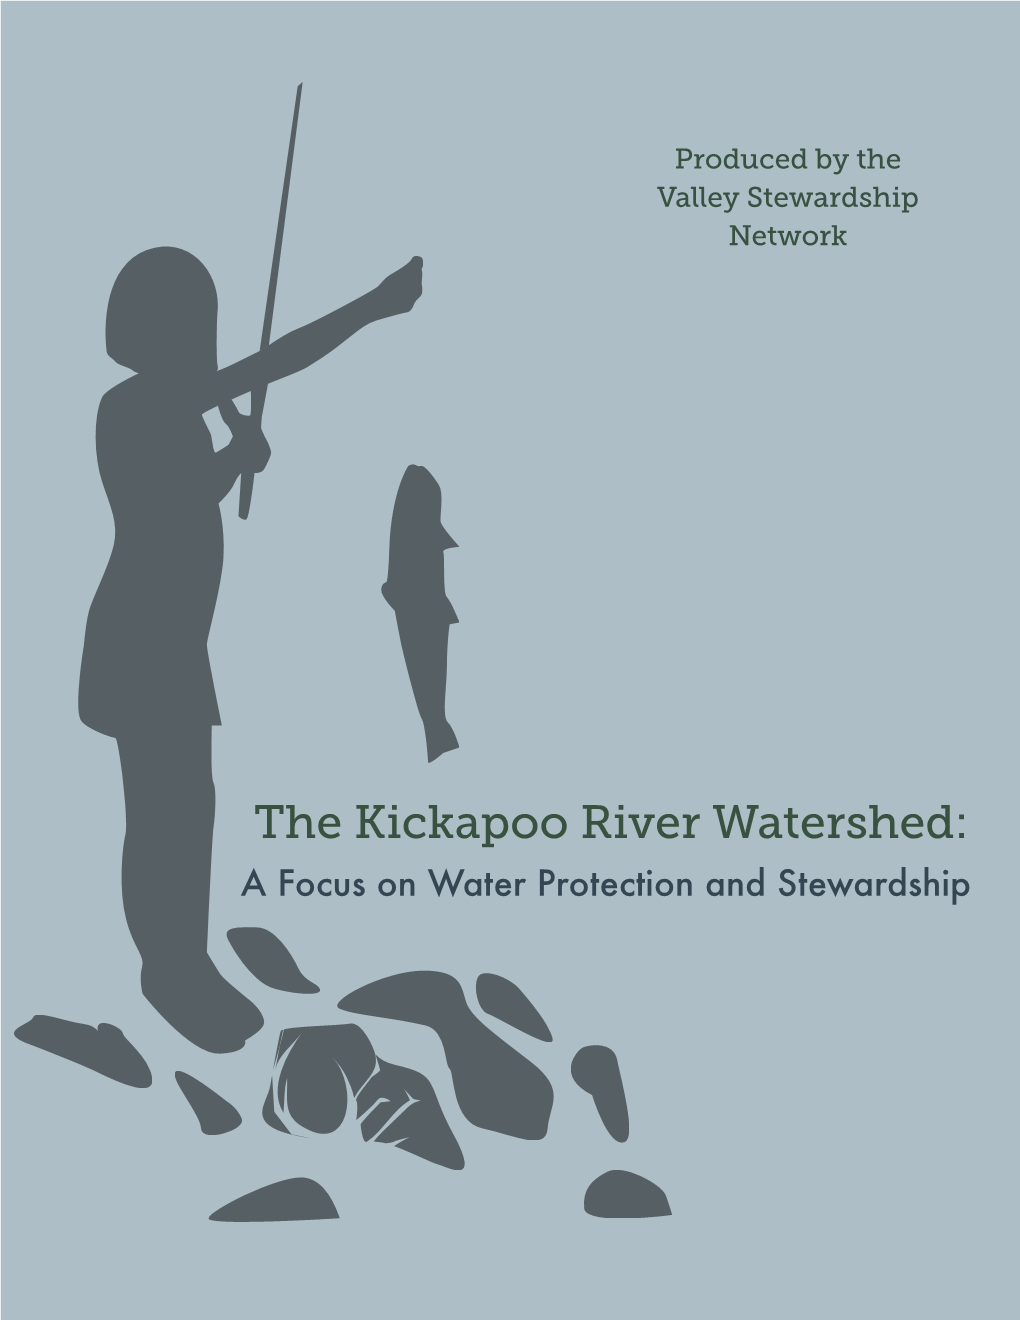 The Kickapoo River Watershed: a Focus on Water Protection and Stewardship FOREWORD